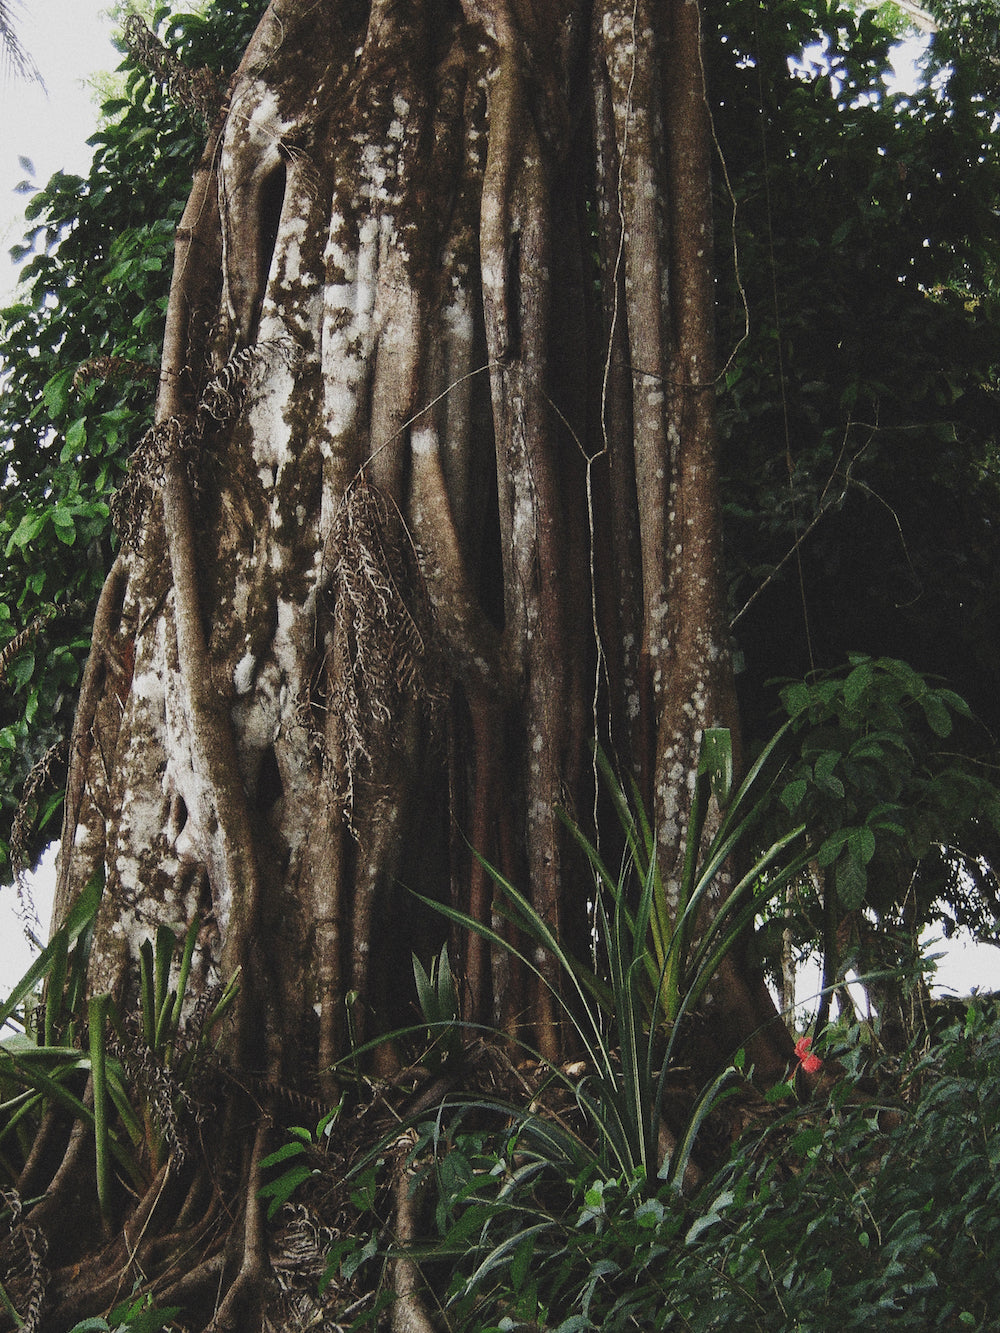 A Banyan tree surrounded by foliage in Costa Rica.